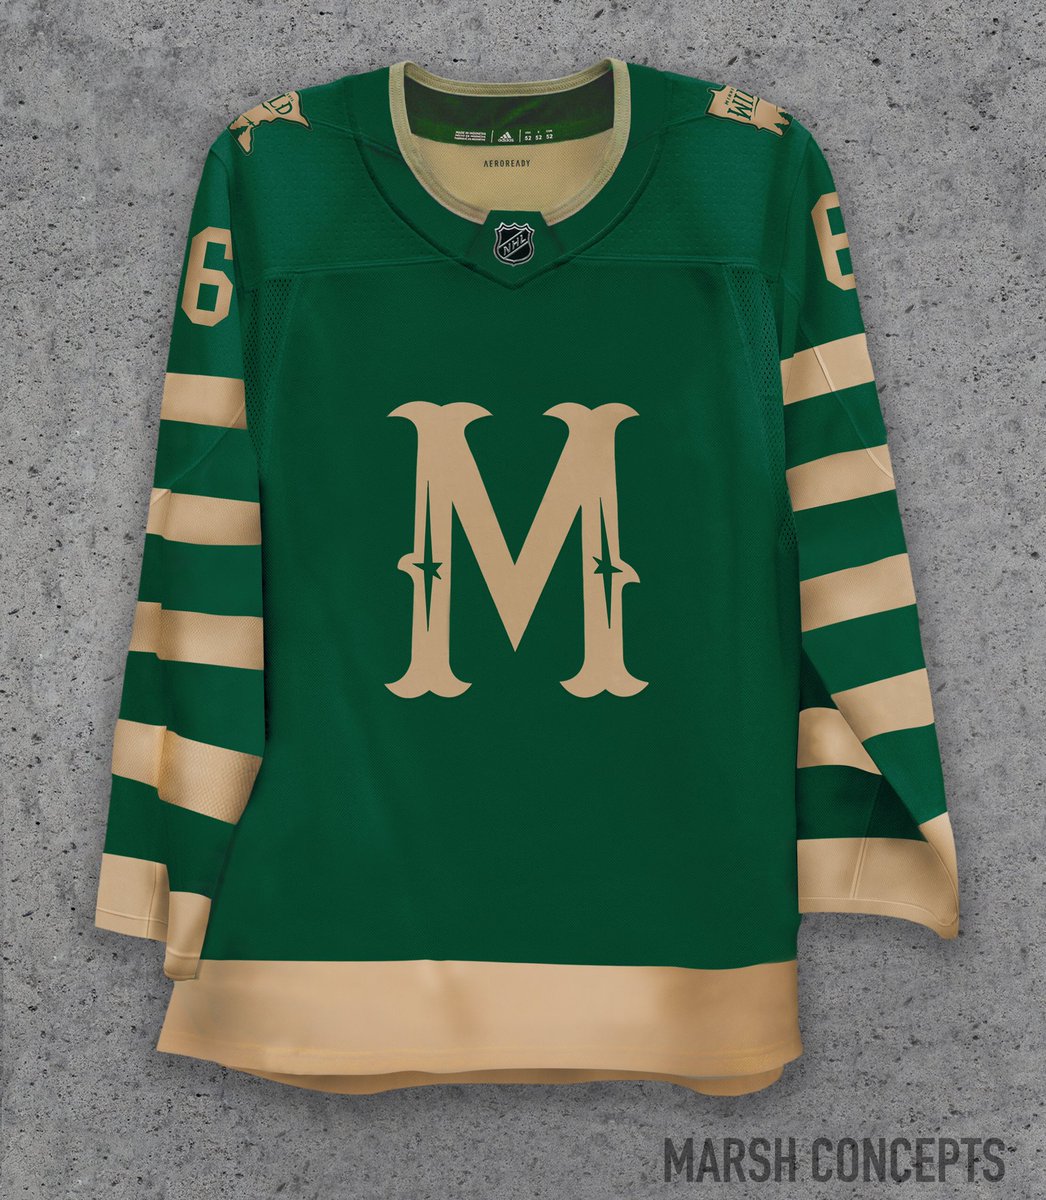 Andrew Marsh on X: Here is my @mnwild #WinterClassic Concept